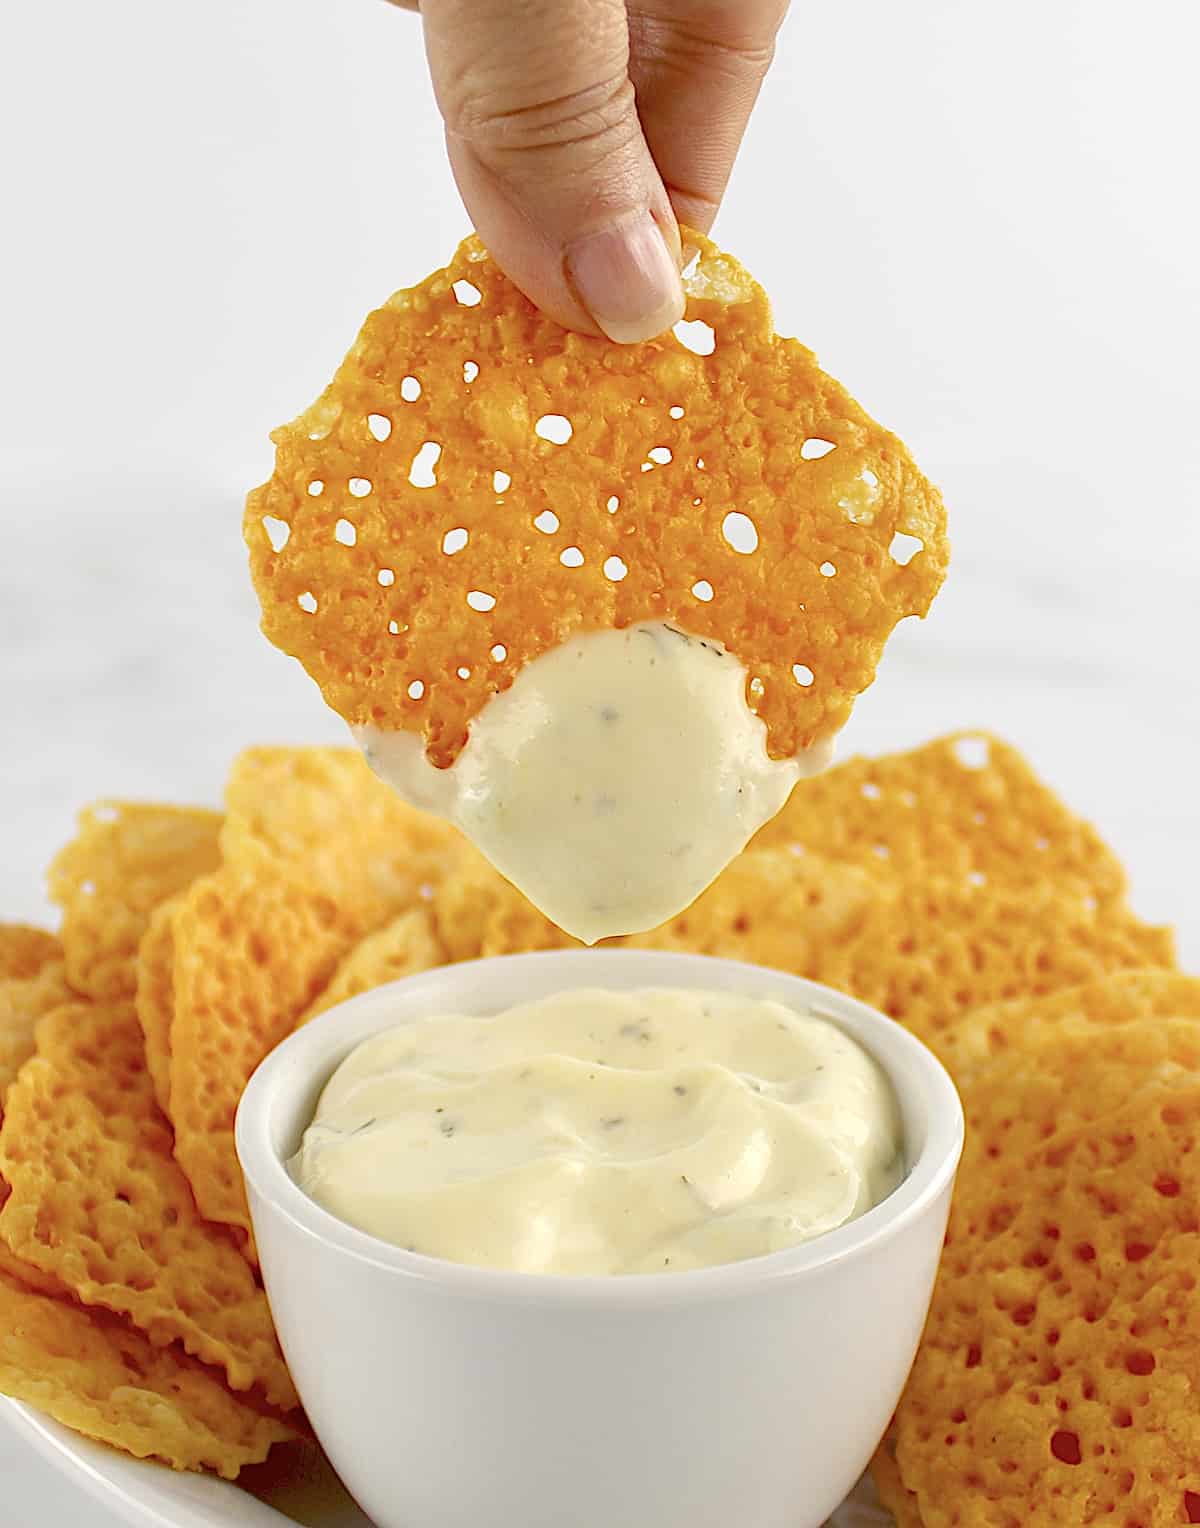 Keto Baked Cheese Crisp Cracker being dipped into dip